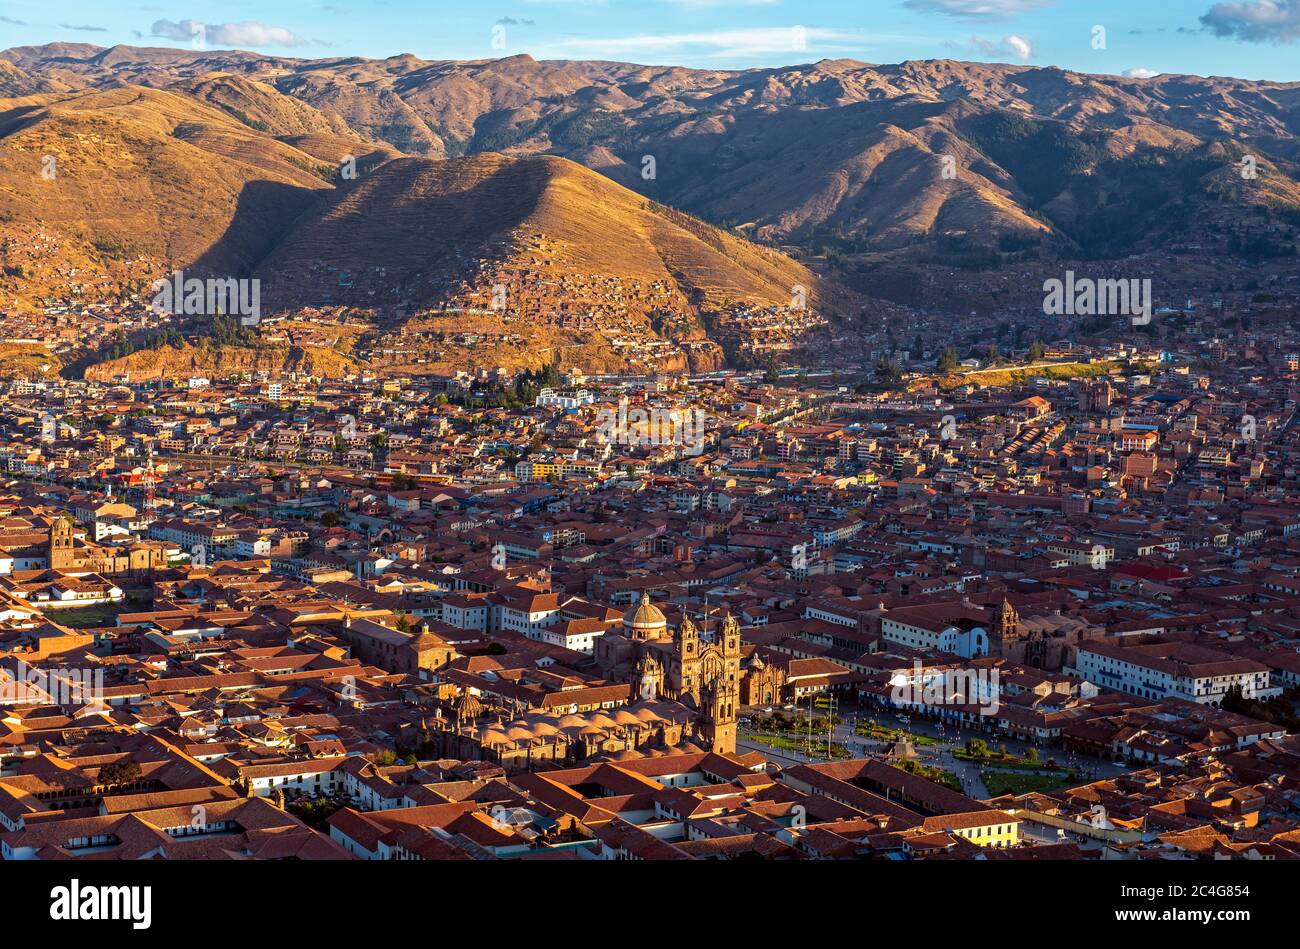 Skyline of Cusco with the Plaza de Armas main square and the Andes mountains in the background at sunset, Peru. 'Viva el Peru' = Long live Peru. Stock Photo